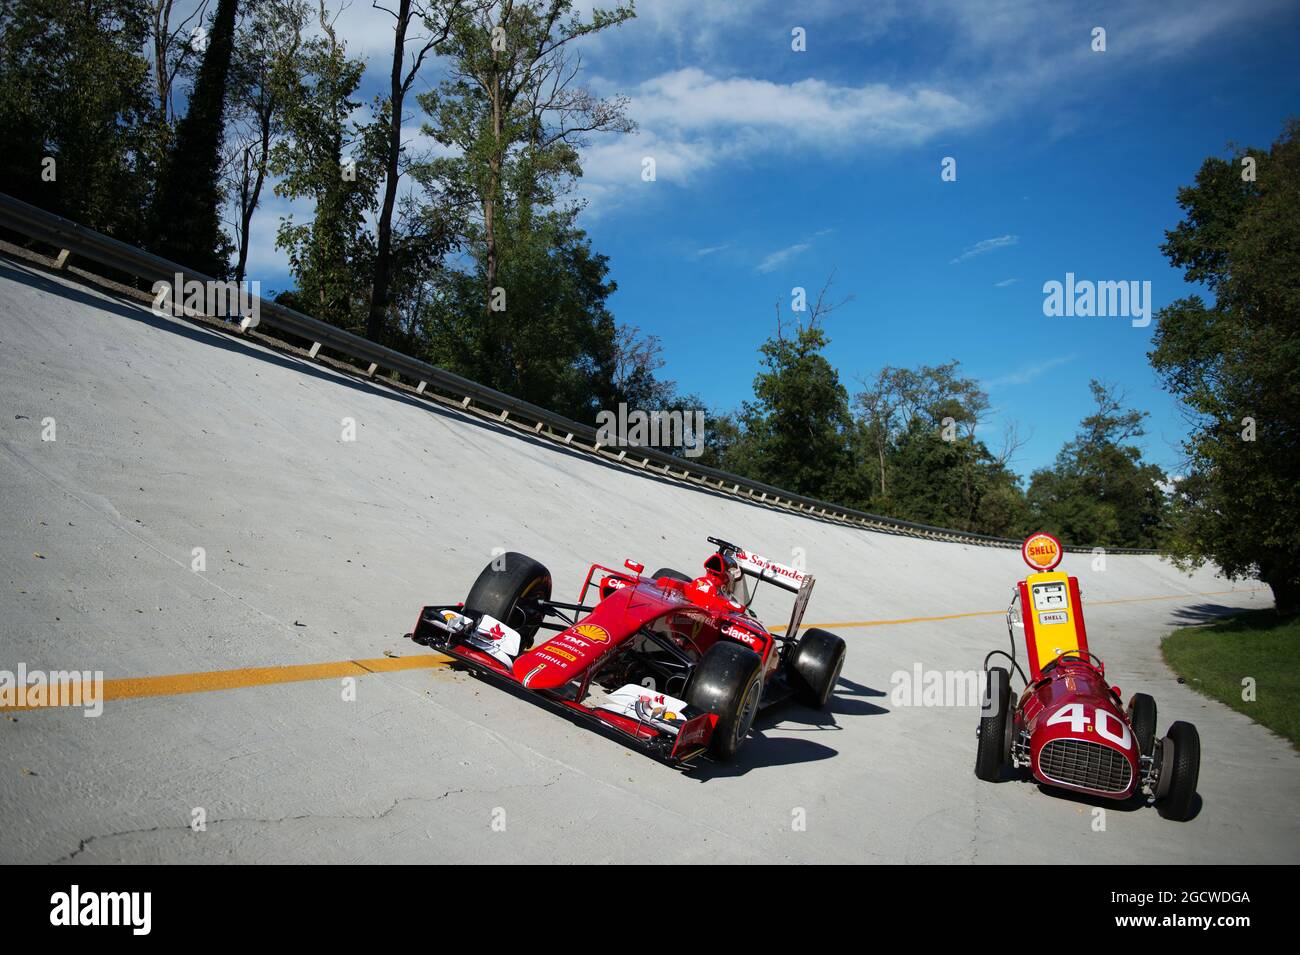 The Ferrari SF15-T and Ferrari 166 F2 cars on the Monza banking at a Shell photoshoot. Italian Grand Prix, Saturday 5th September 2015. Monza Italy. Stock Photo